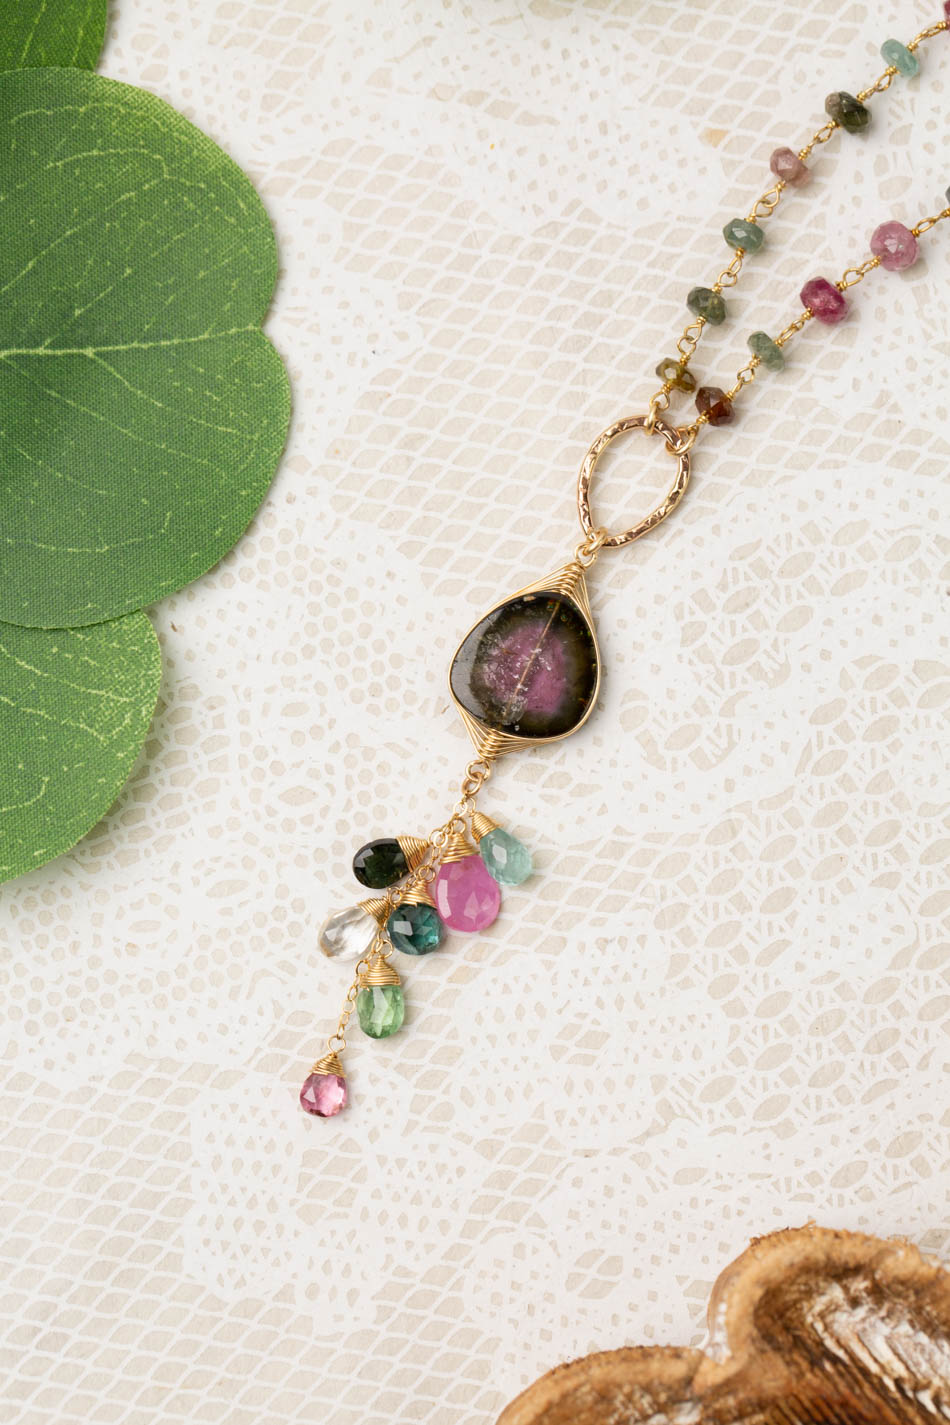 One Of A Kind 26-28" Watermelon Tourmaline Slice With Multicolored Faceted Tourmaline Briolettes Statement Necklace